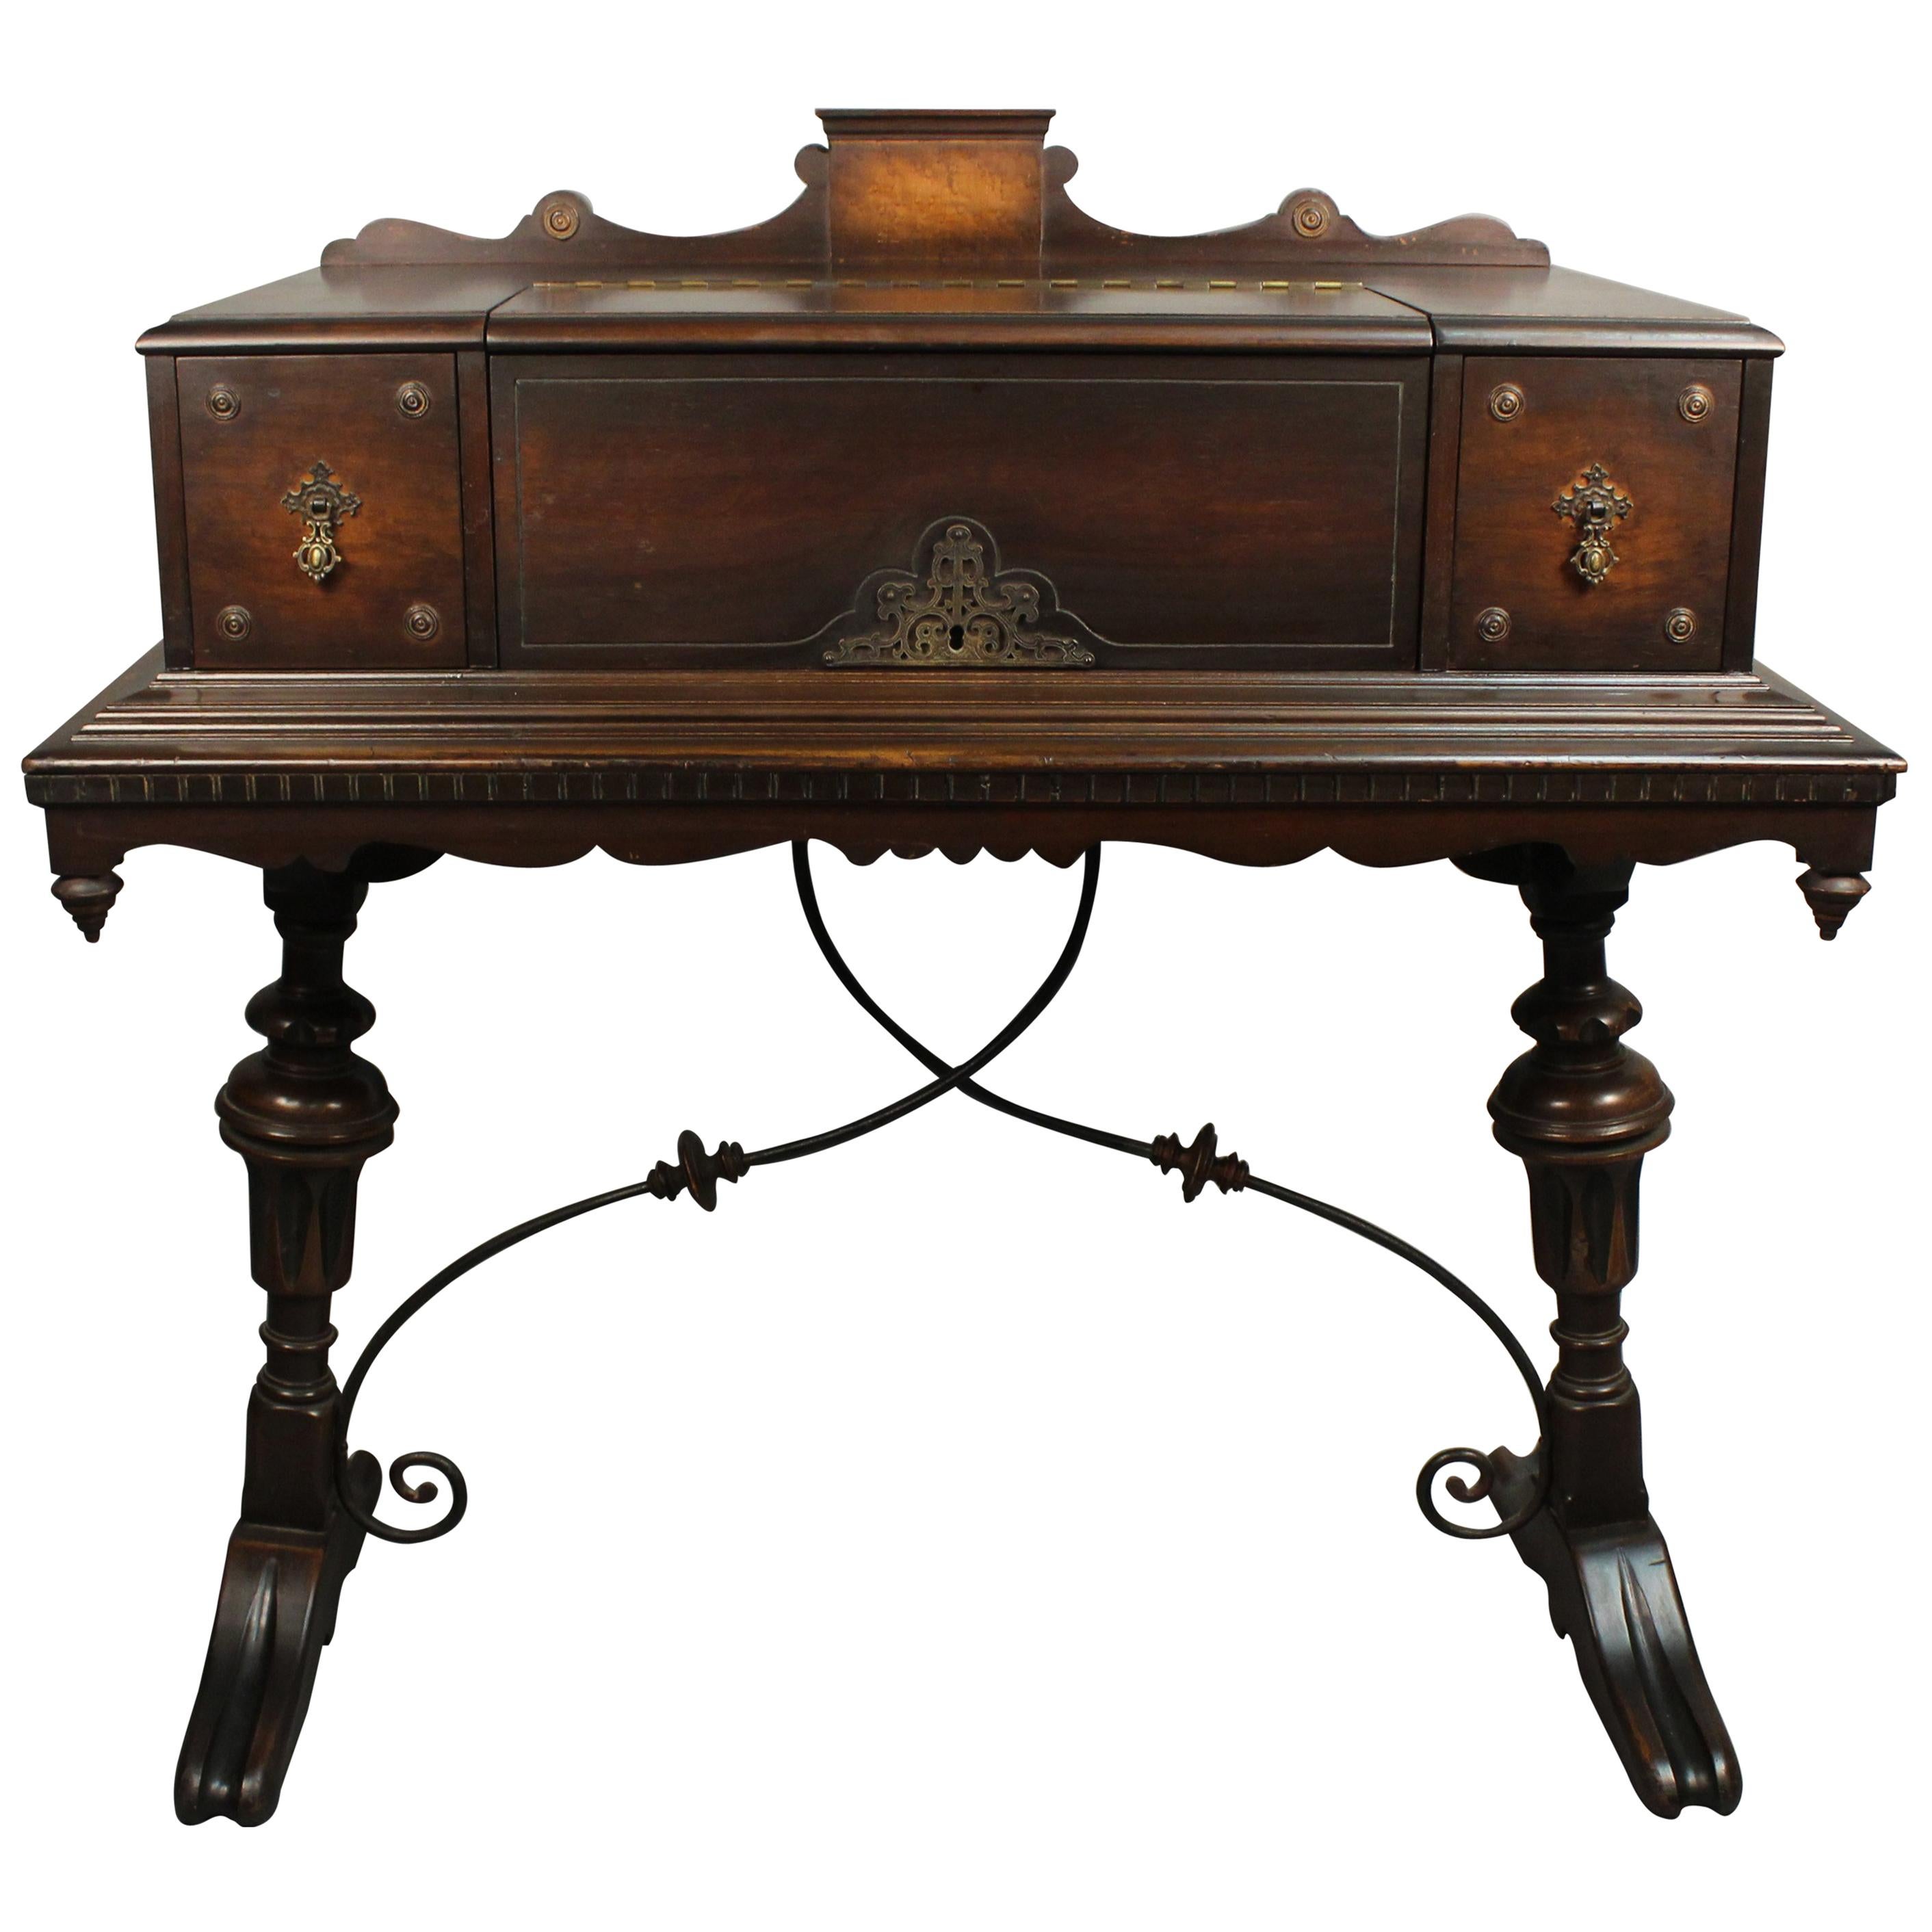 Handsome Spanish Revival 1920s Writing Desk Table with Wrought Iron Stretcher